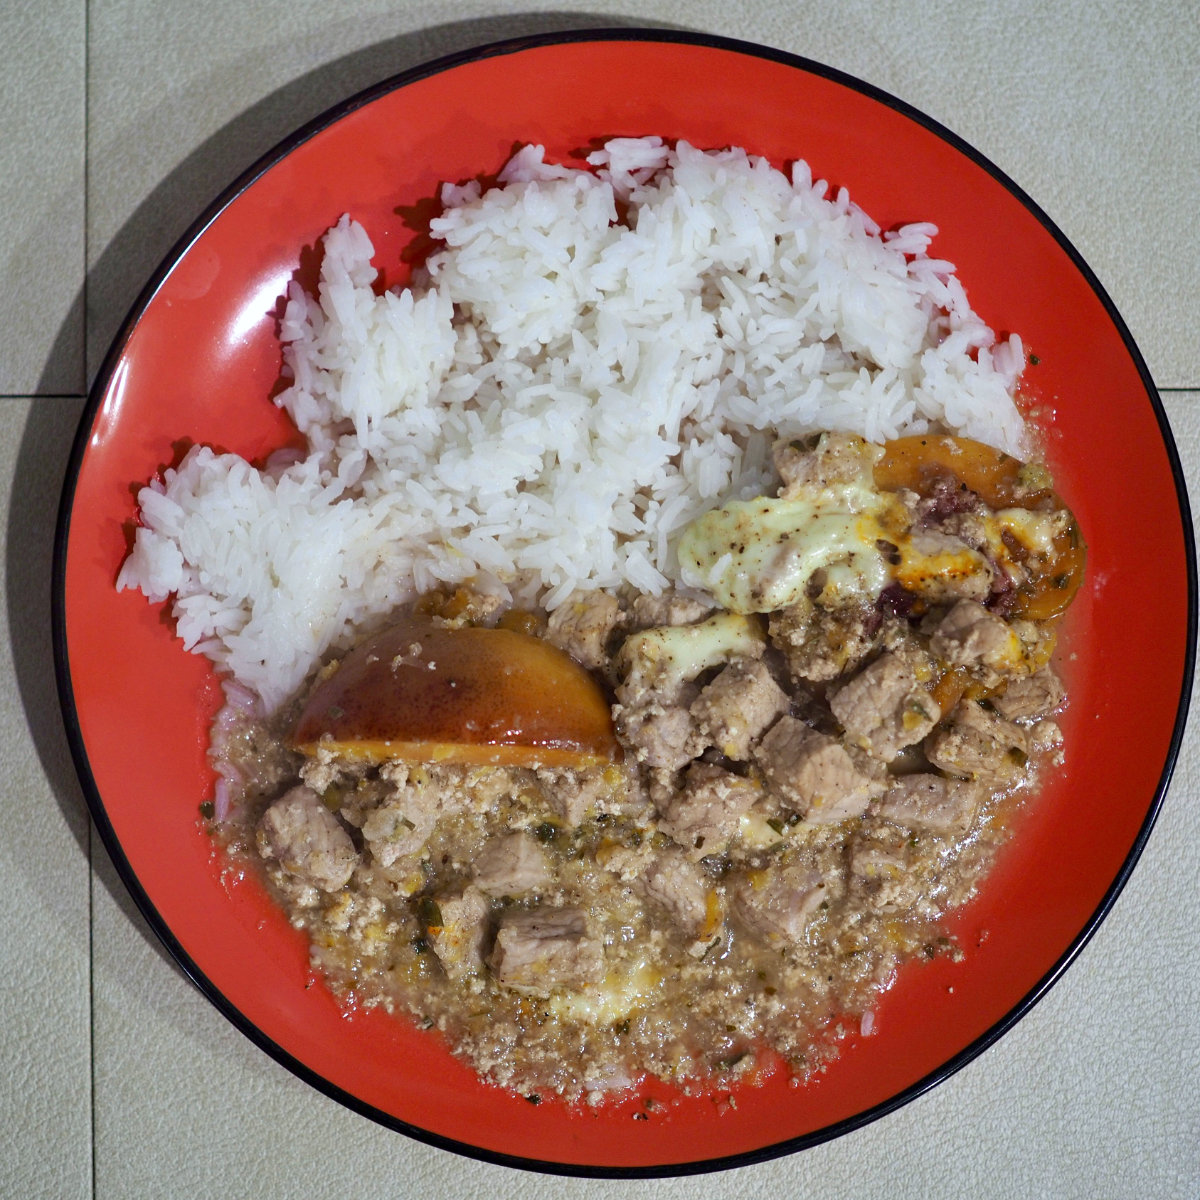 Pork with cheese and peaches